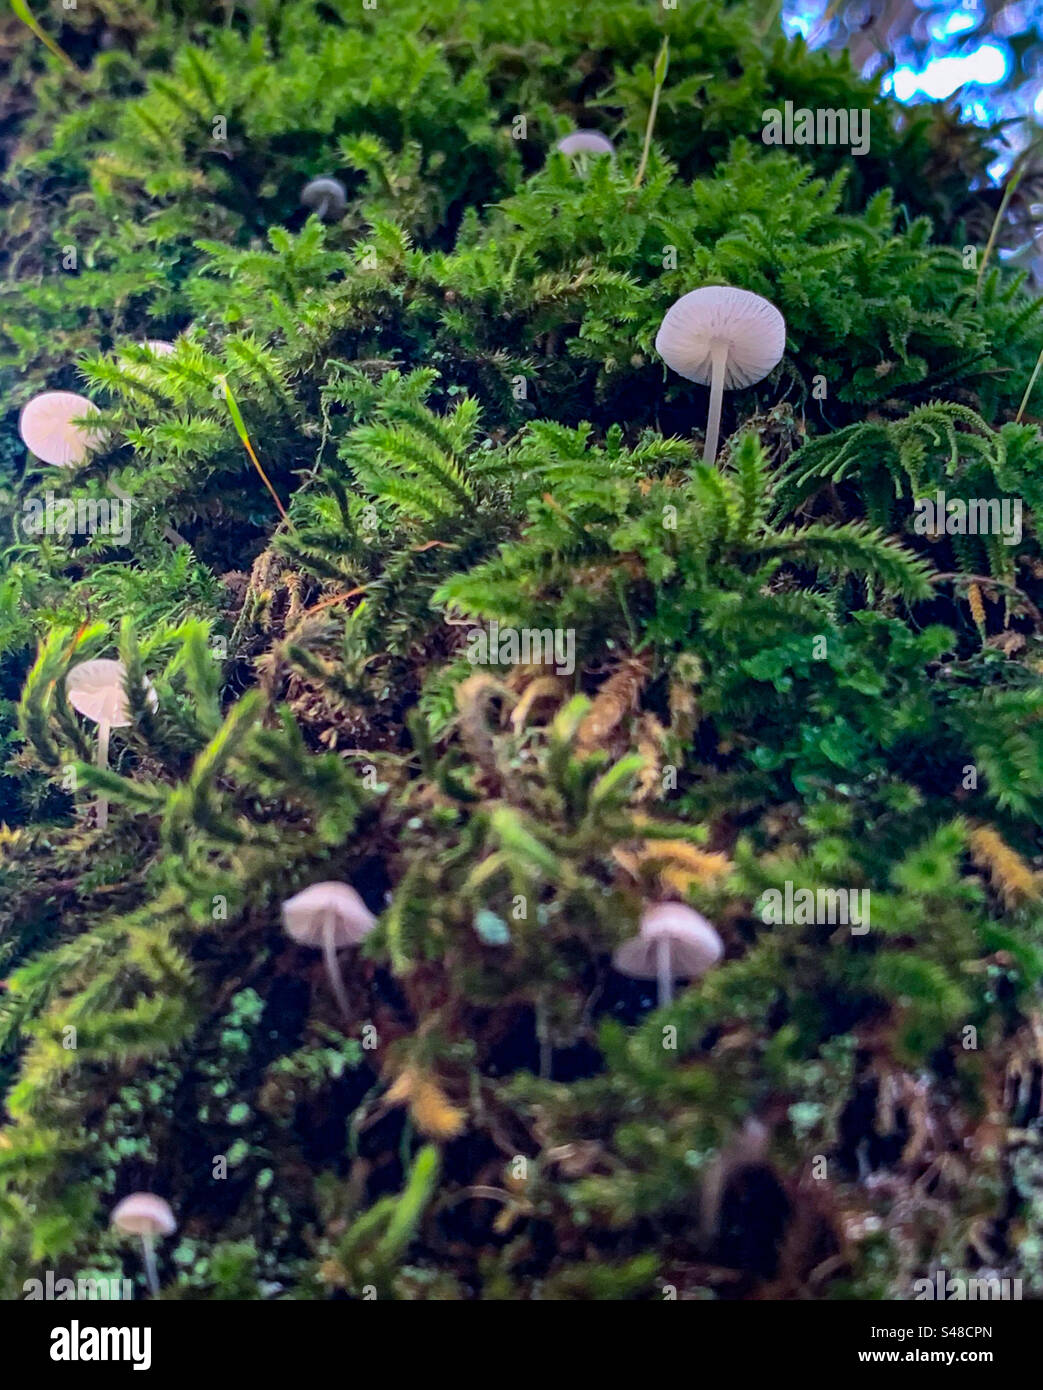 Tiny coprinaceae mushrooms growing from moss covered tree Stock Photo